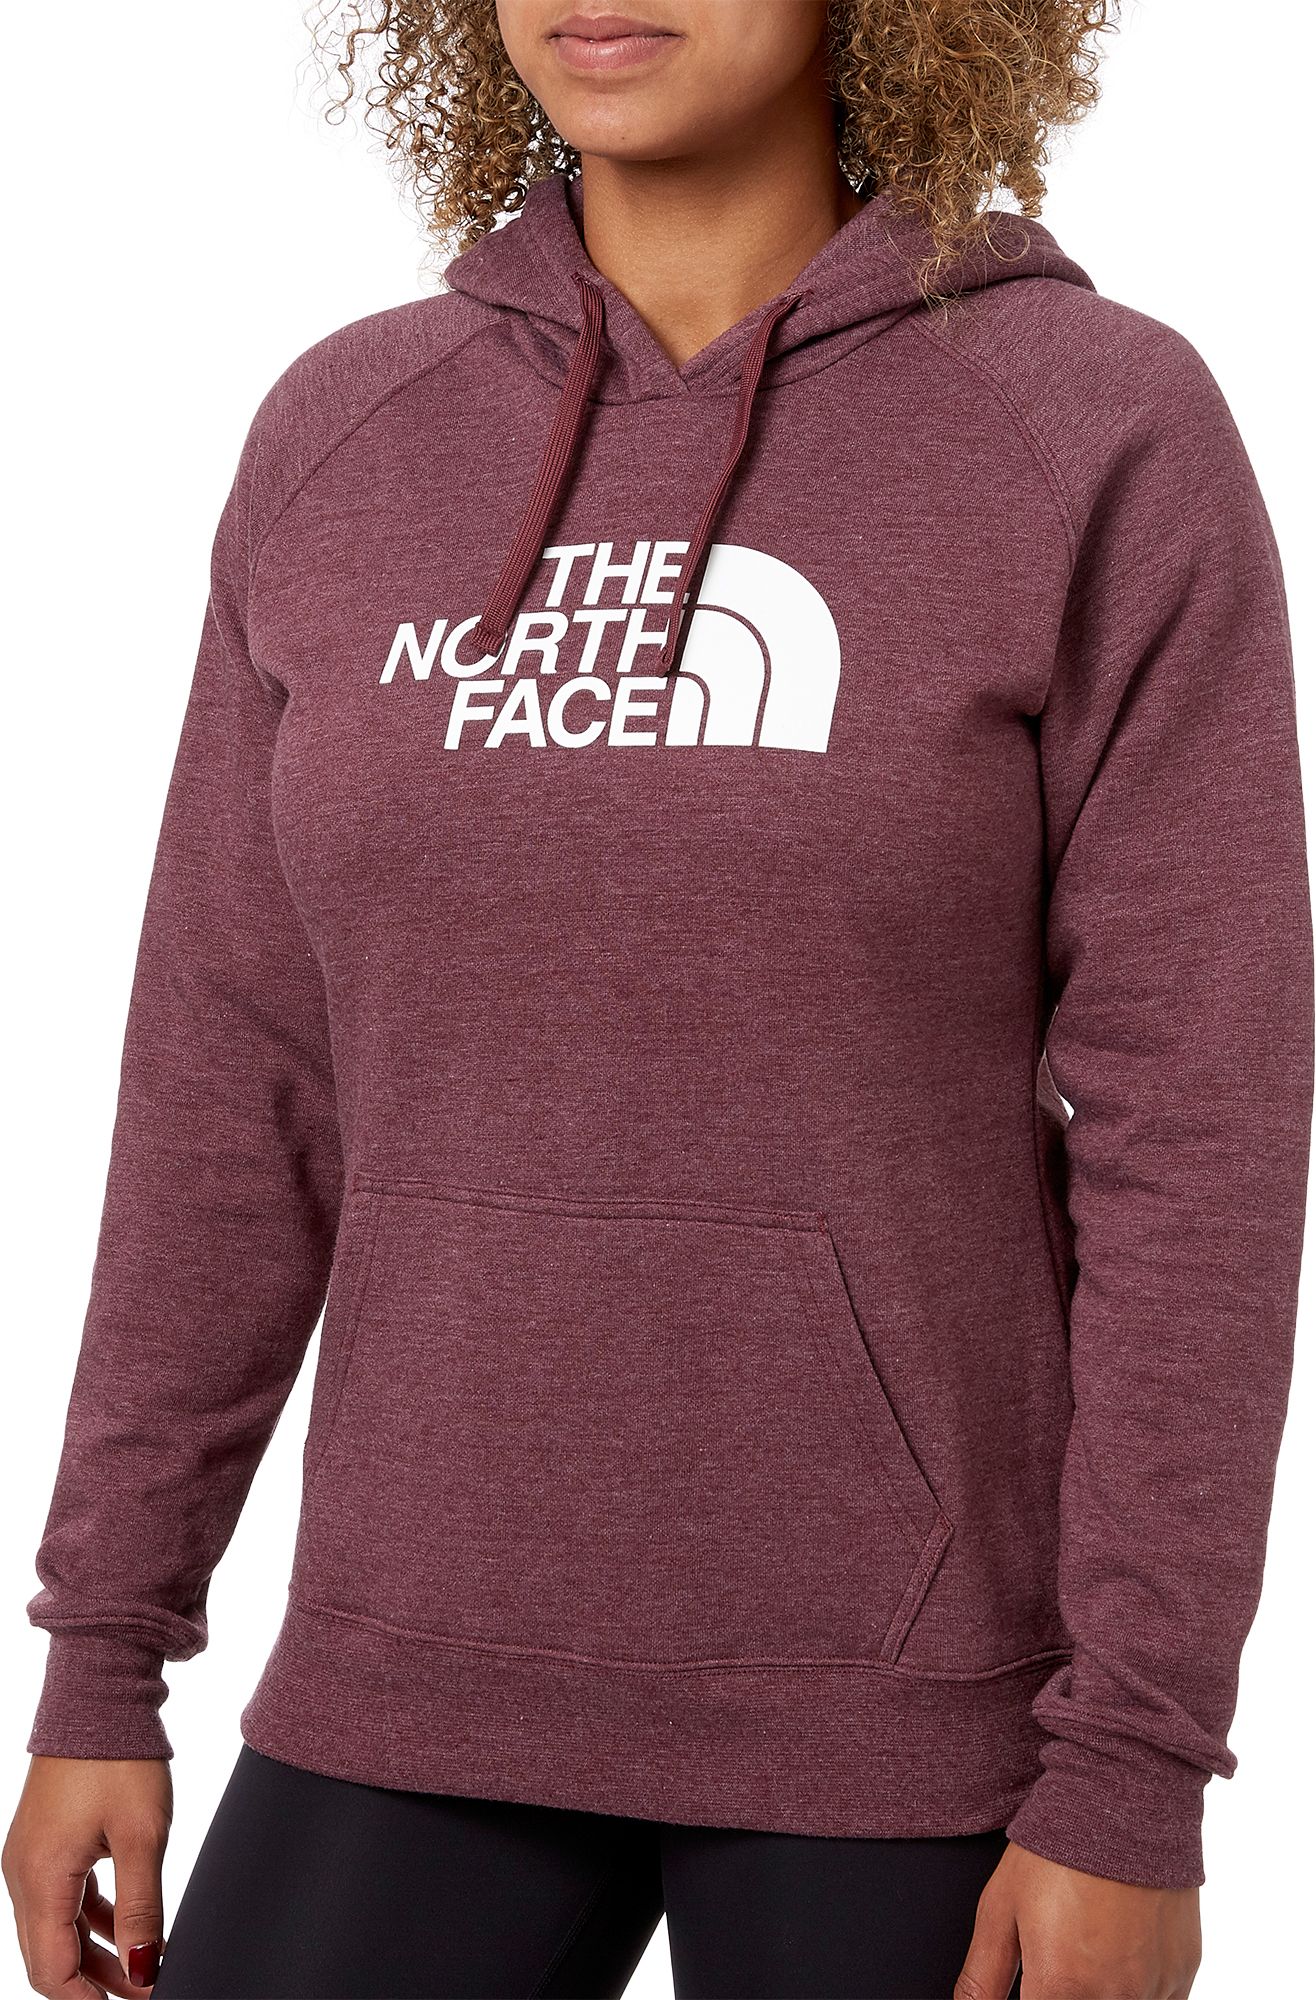 the north face women's hoodies